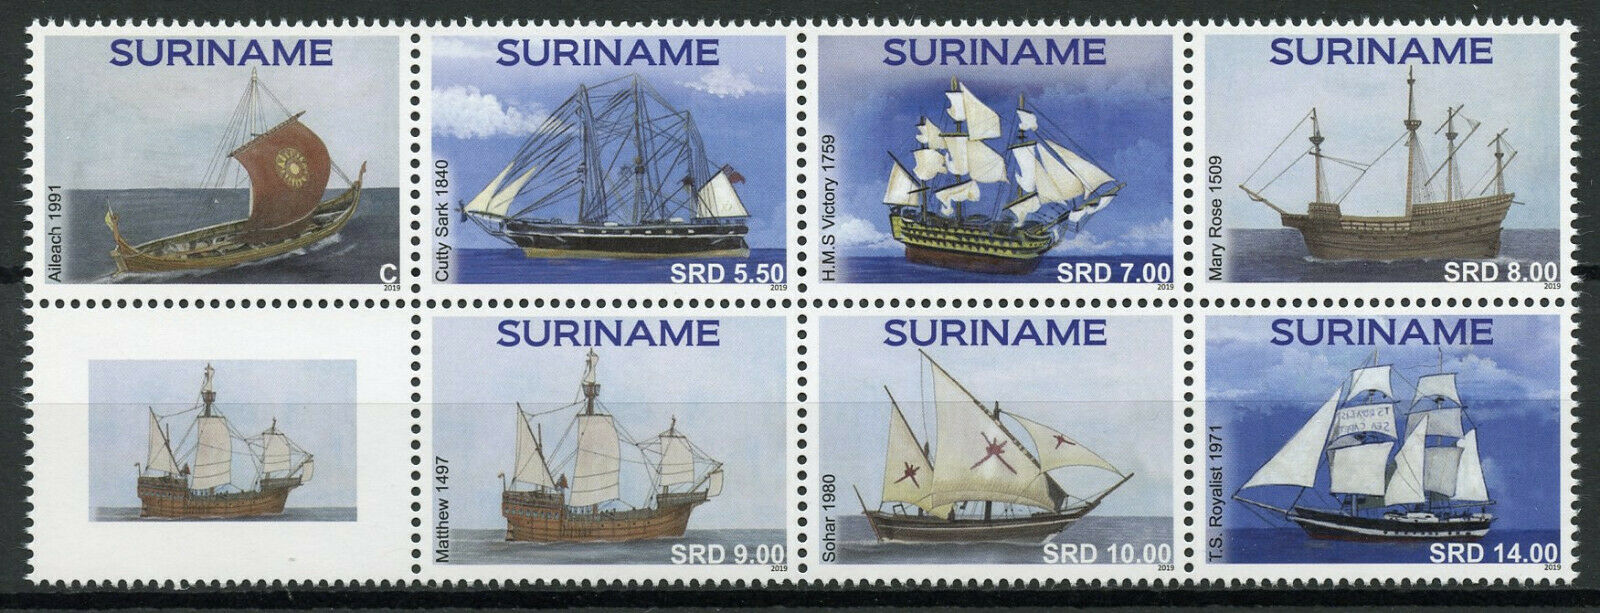 Suriname Classic Ships Stamps 2019 MNH Cutty Sark HMS Victory Mary Rose 7v Block